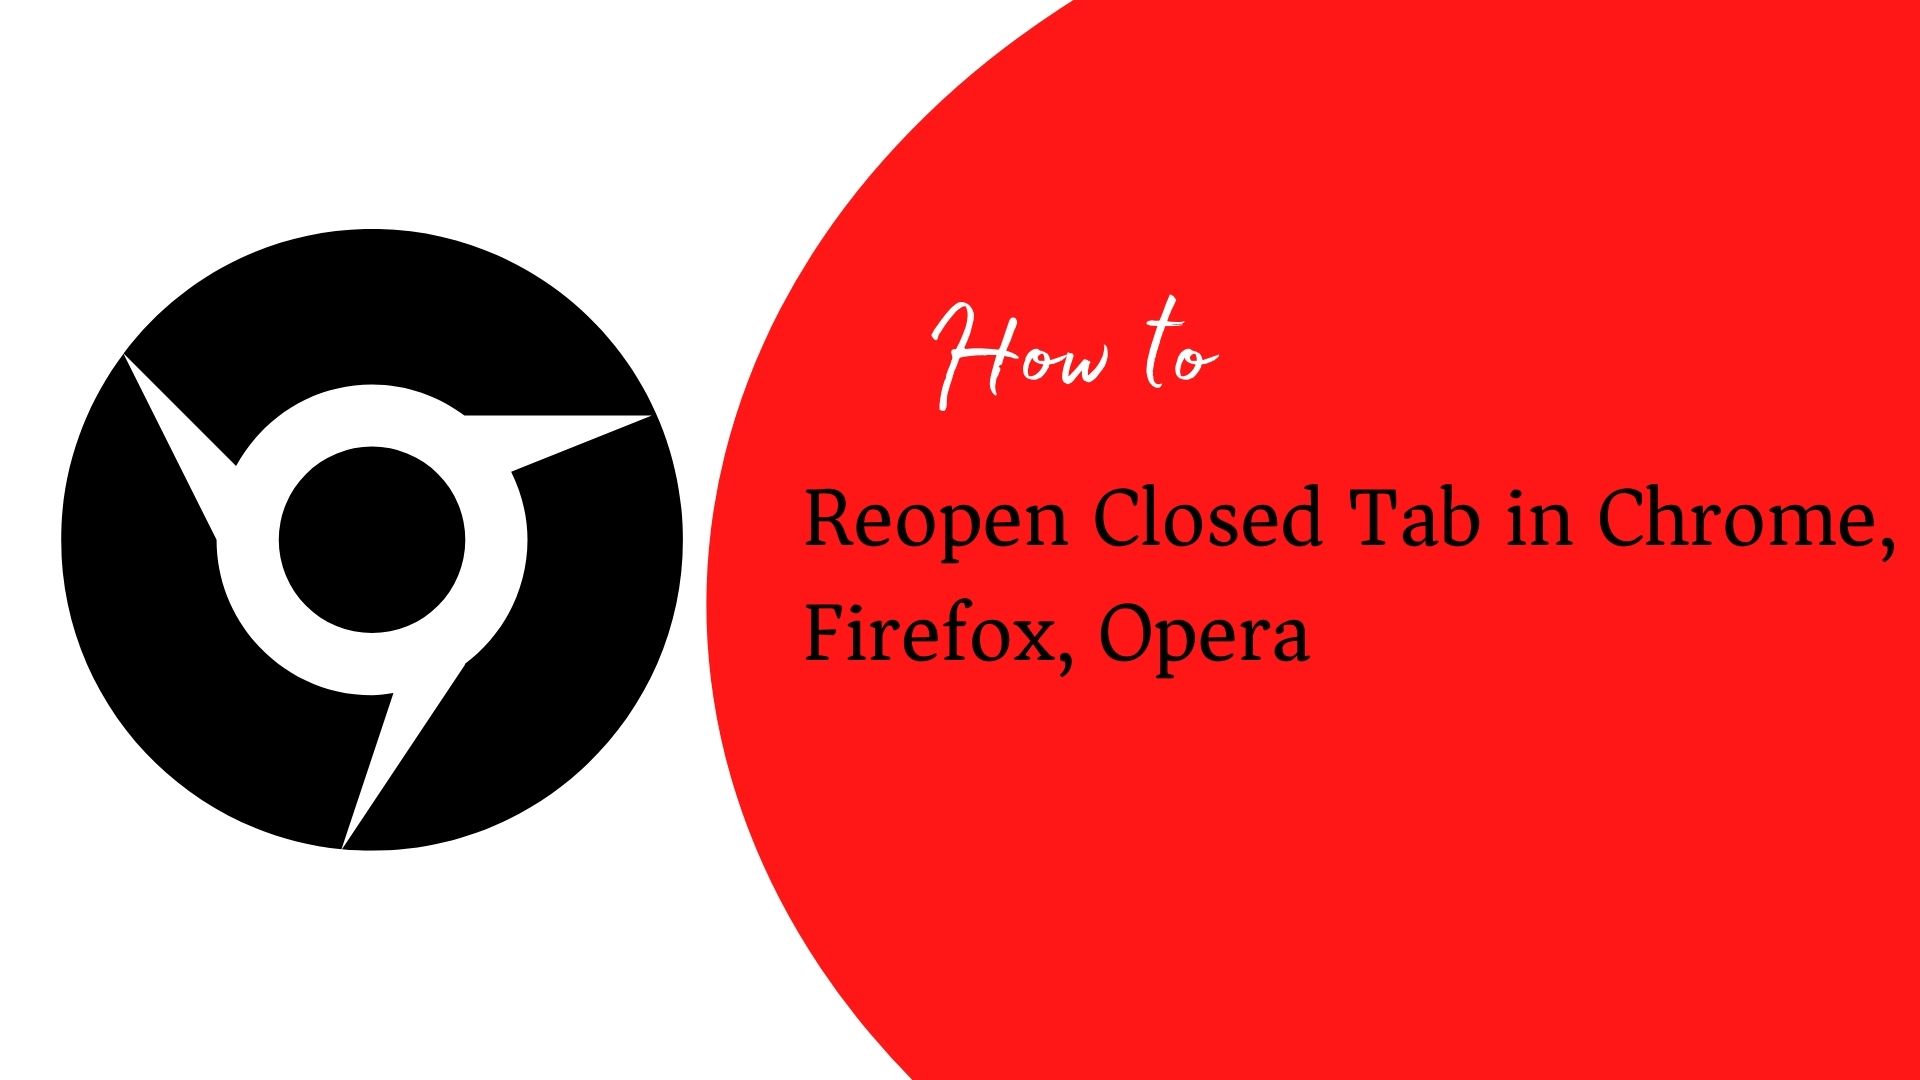 Reopen Closed Tab in Chrome